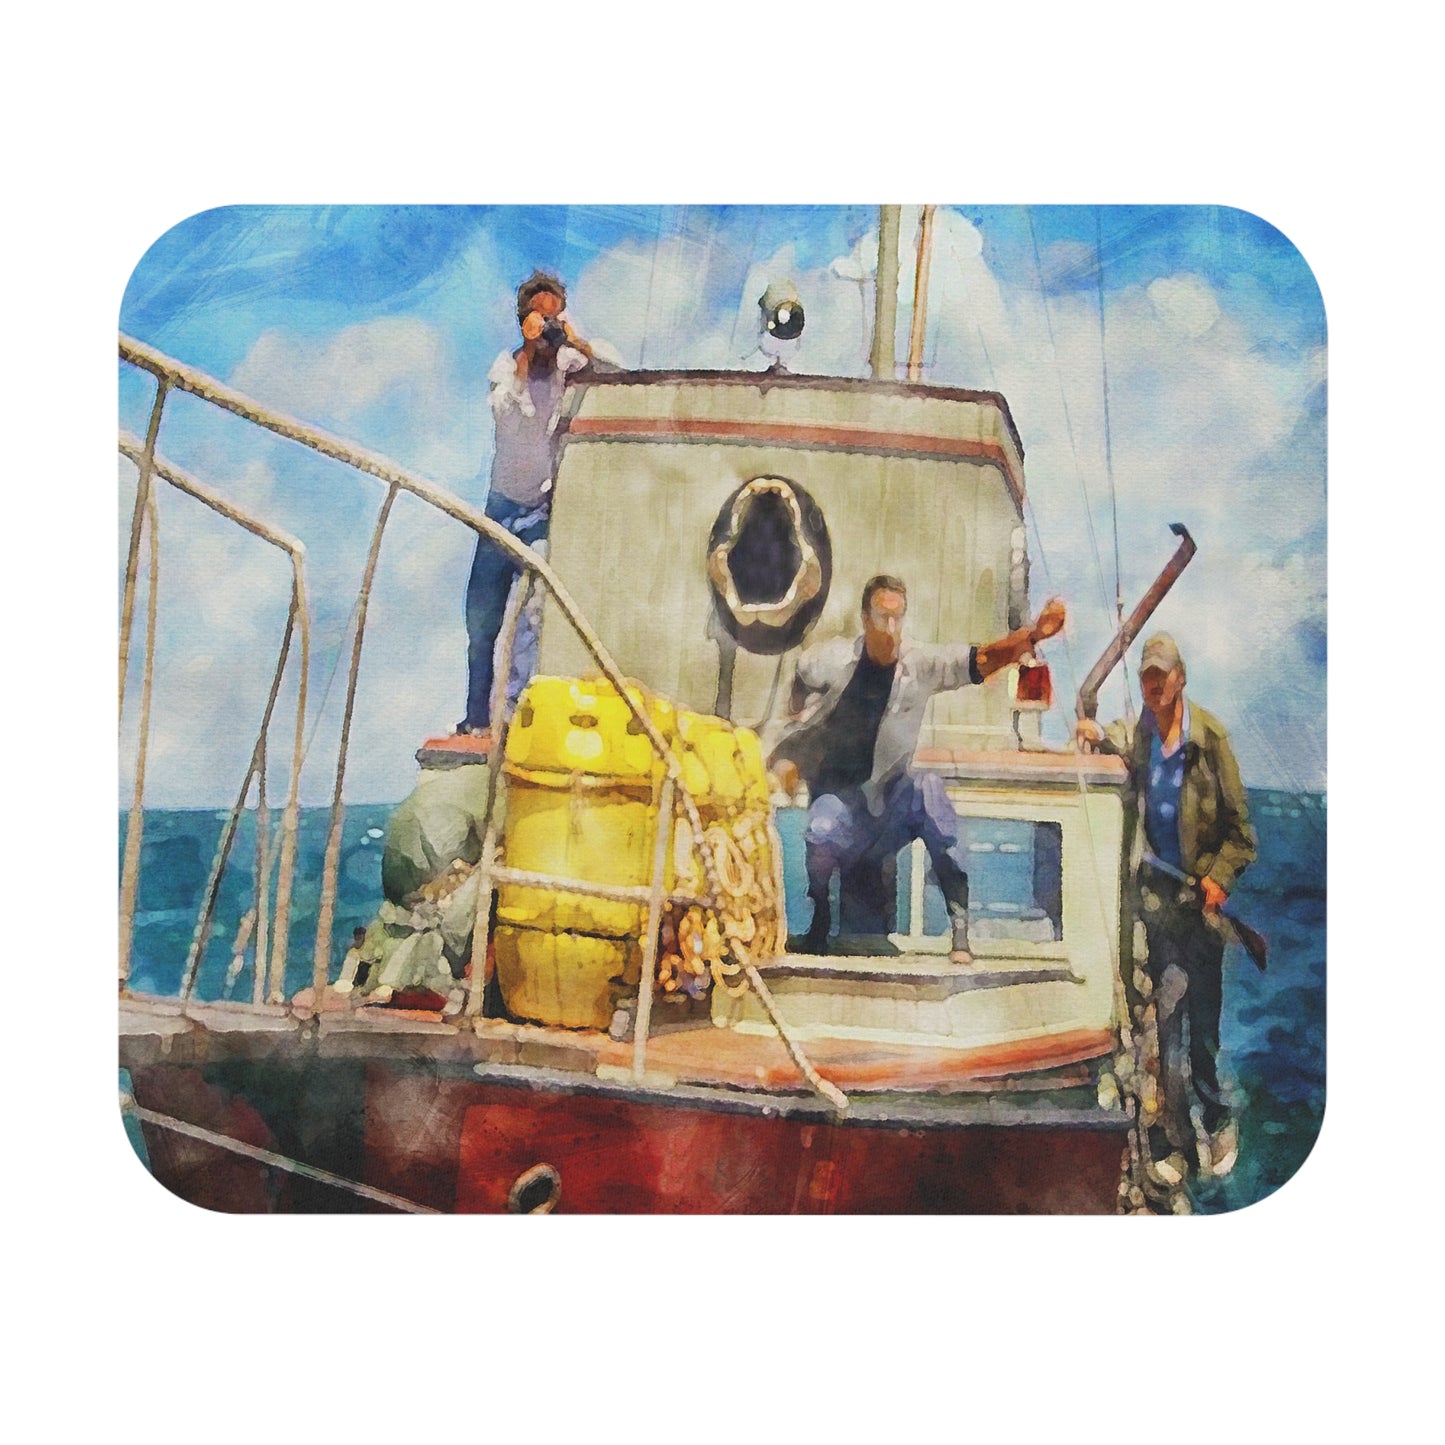 Jaws Inspired "Shark Hunting" Mouse Pad - 9x8